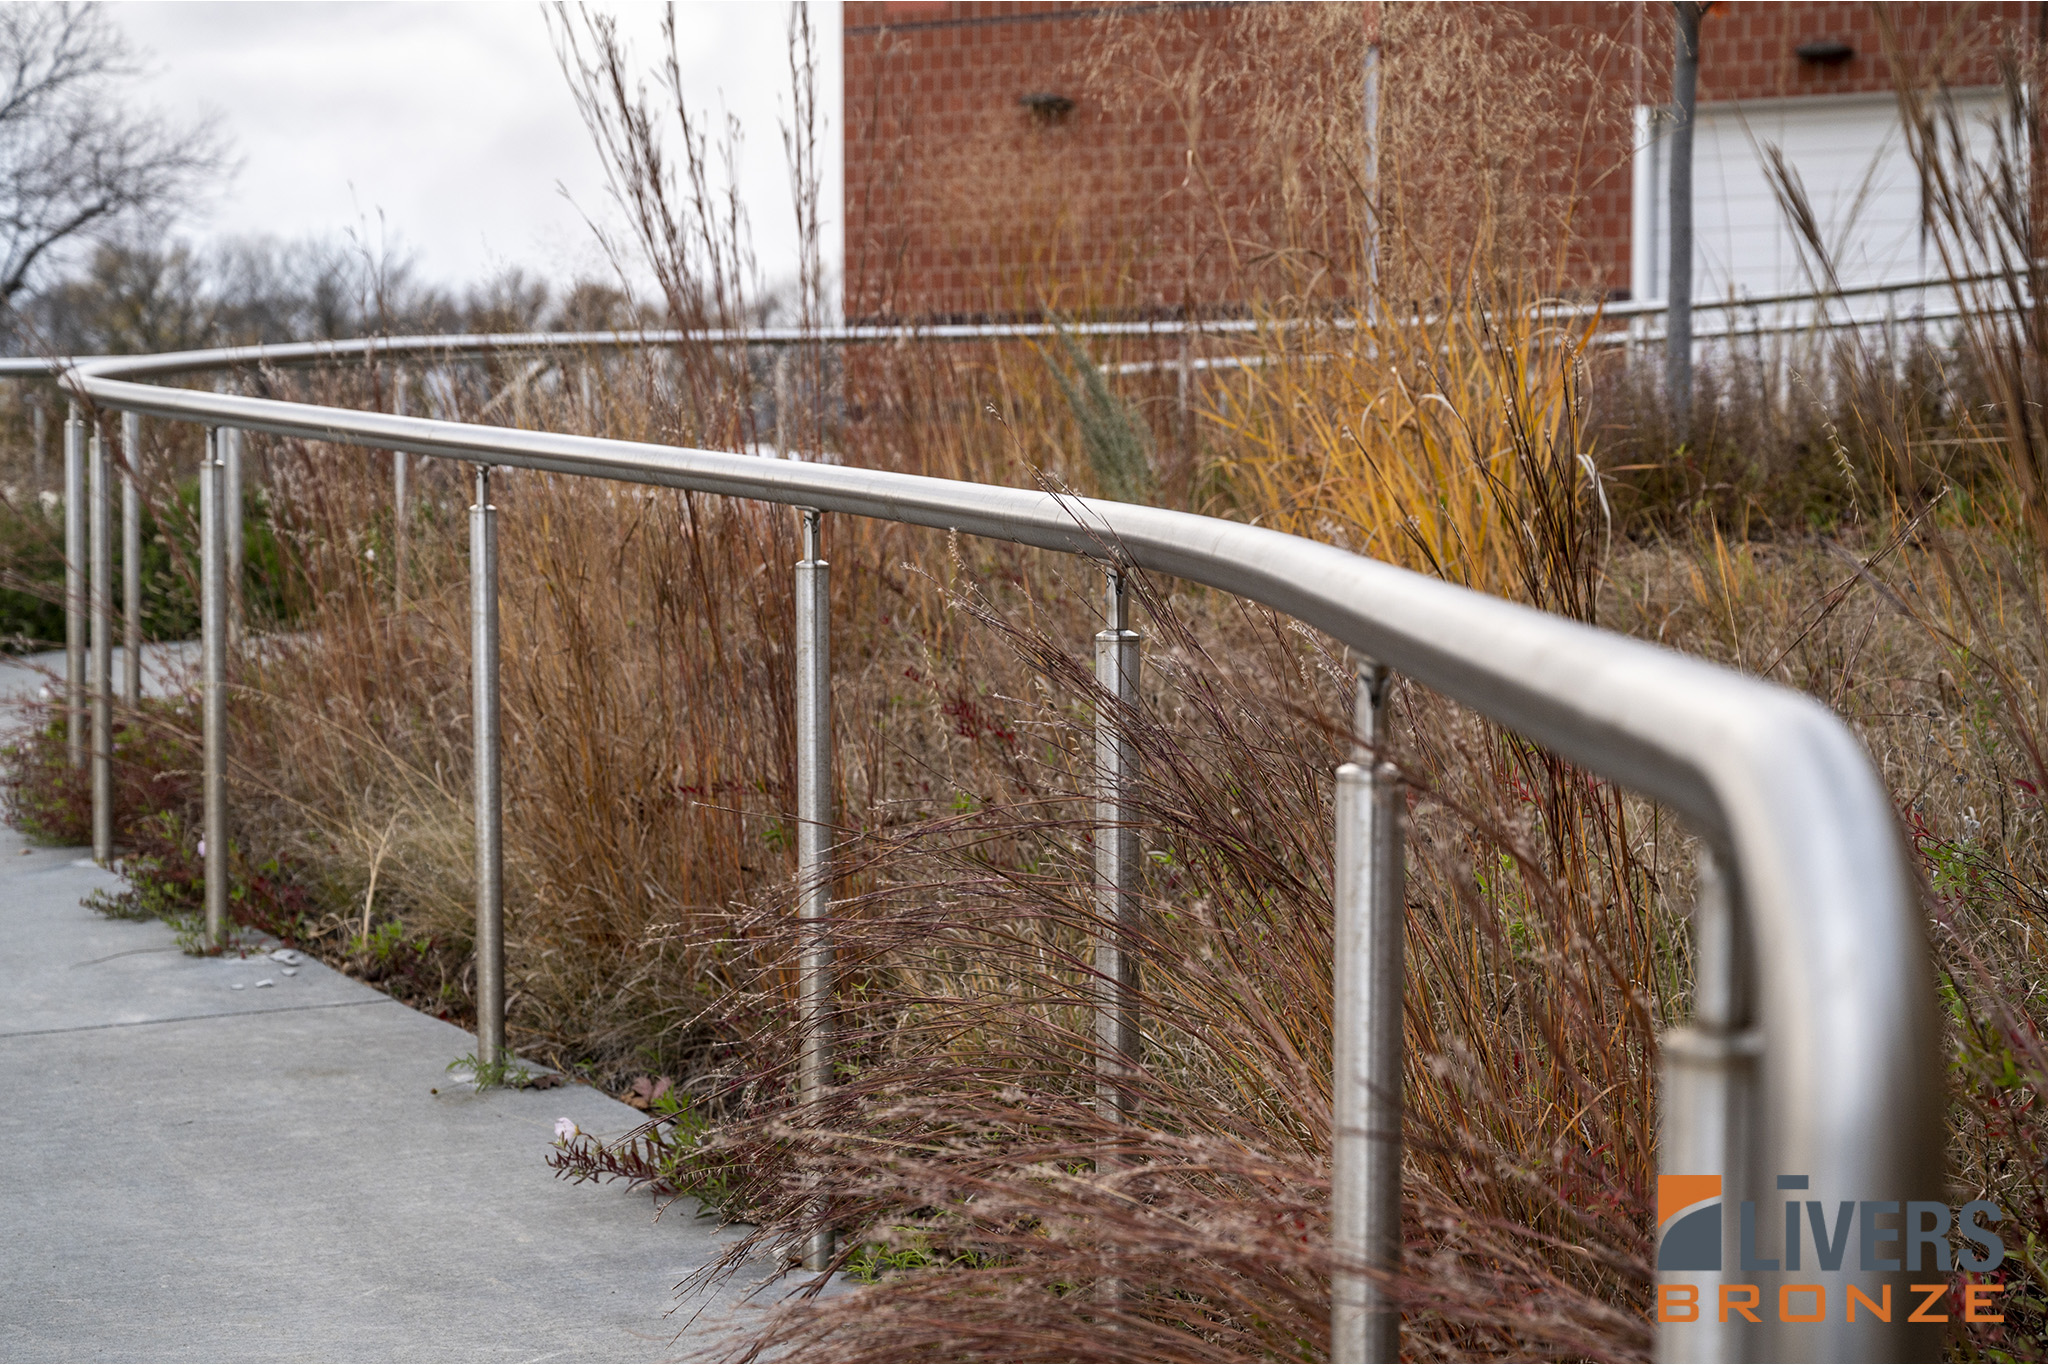 Livers Bronze Illume Puck LED curved railings were installed along the exterior pedestrian ramp at MidAmerican Energy Headquarters, Urbandale, Iowa, and were Made in the USA.